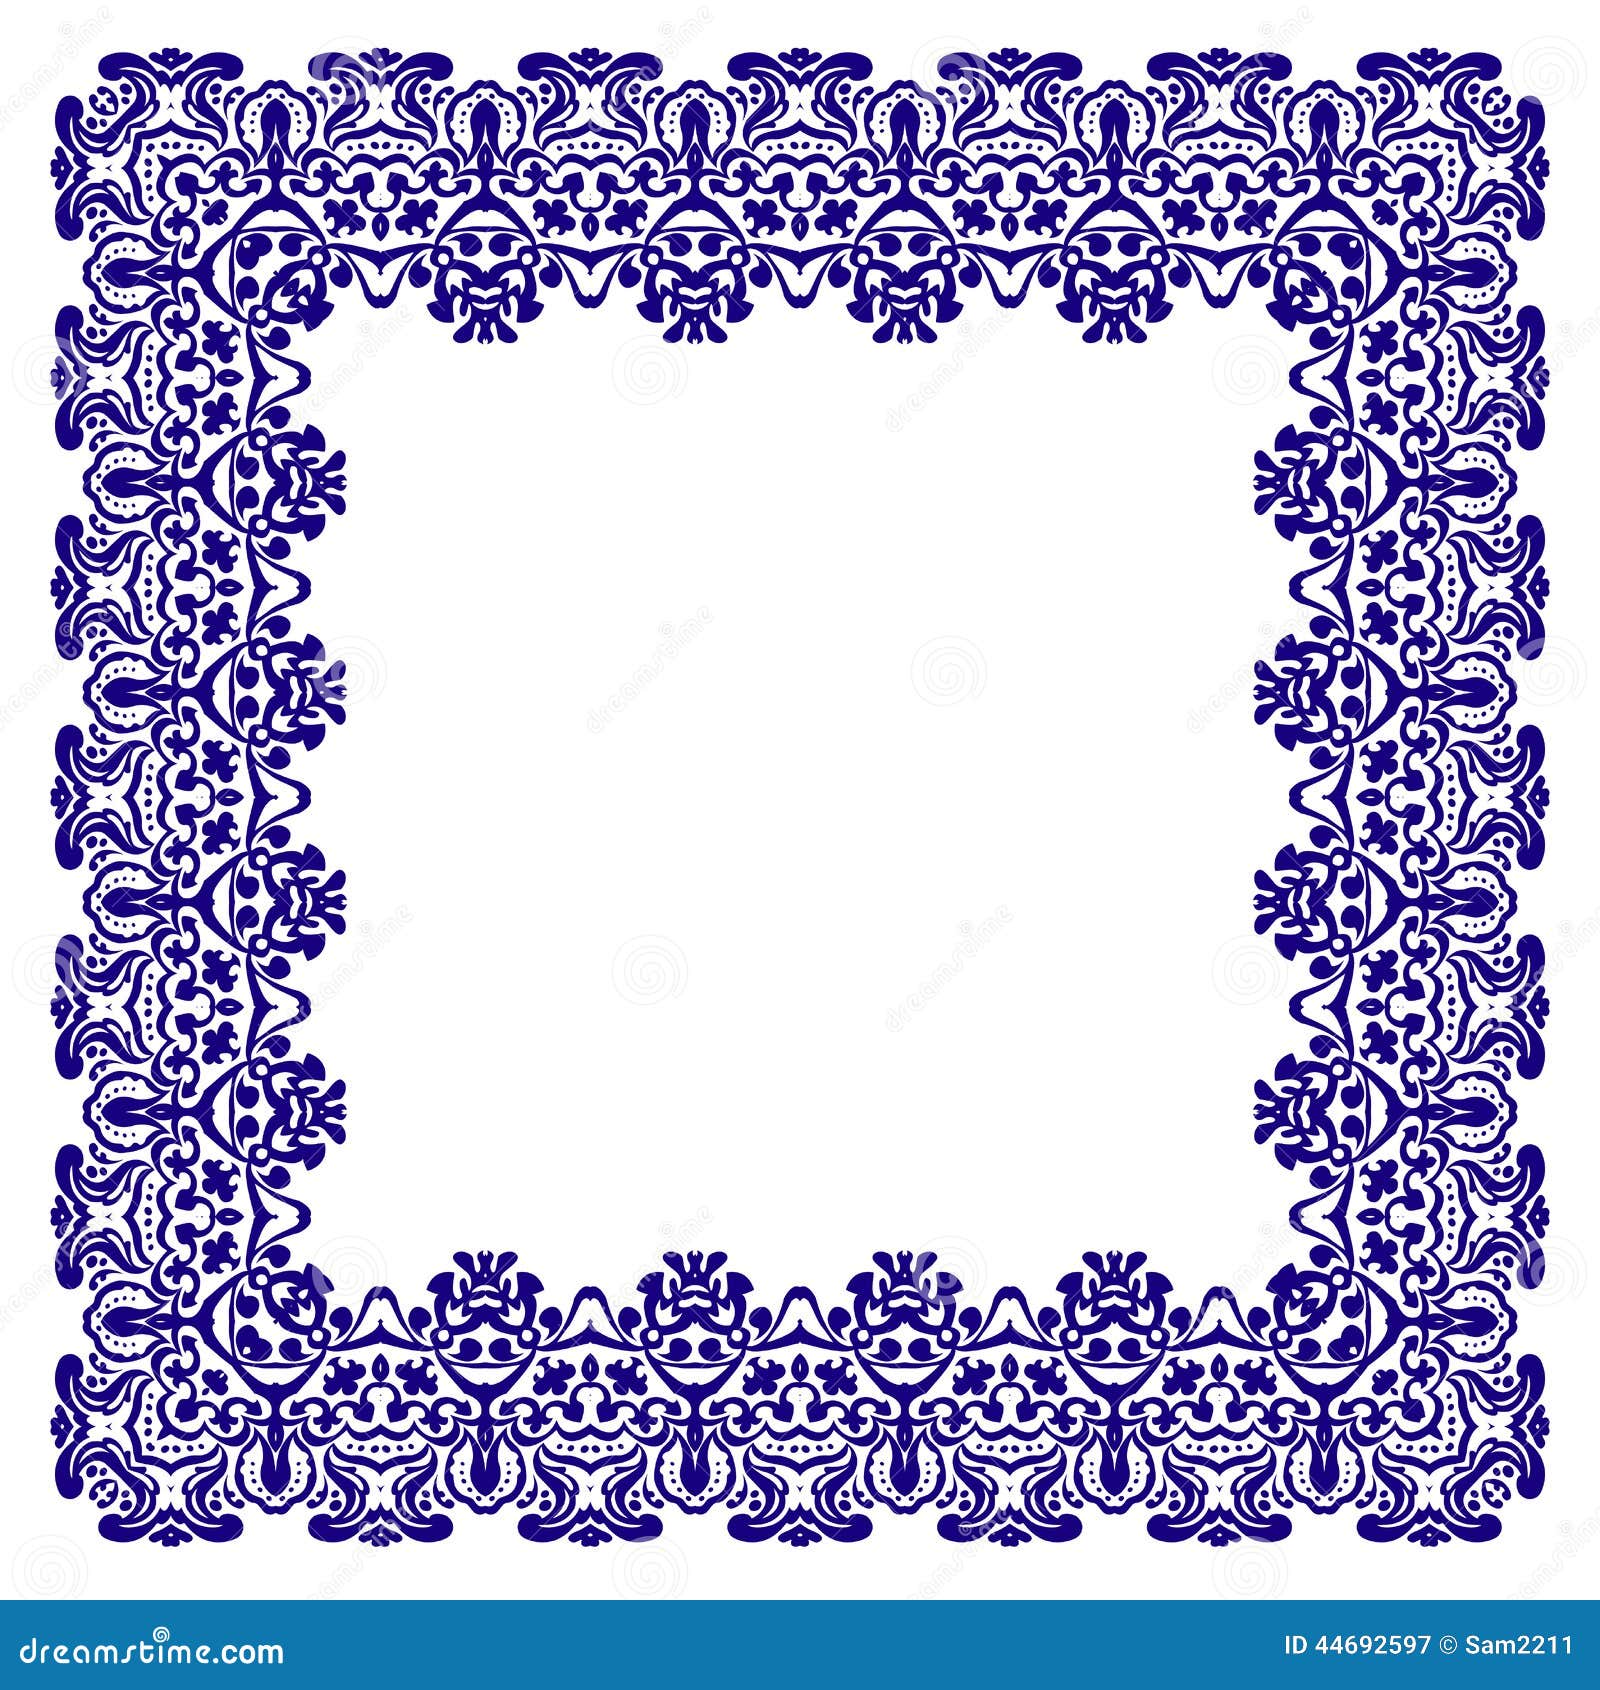  Border  With Swirls Floral  Motif  Frame Stock Vector 